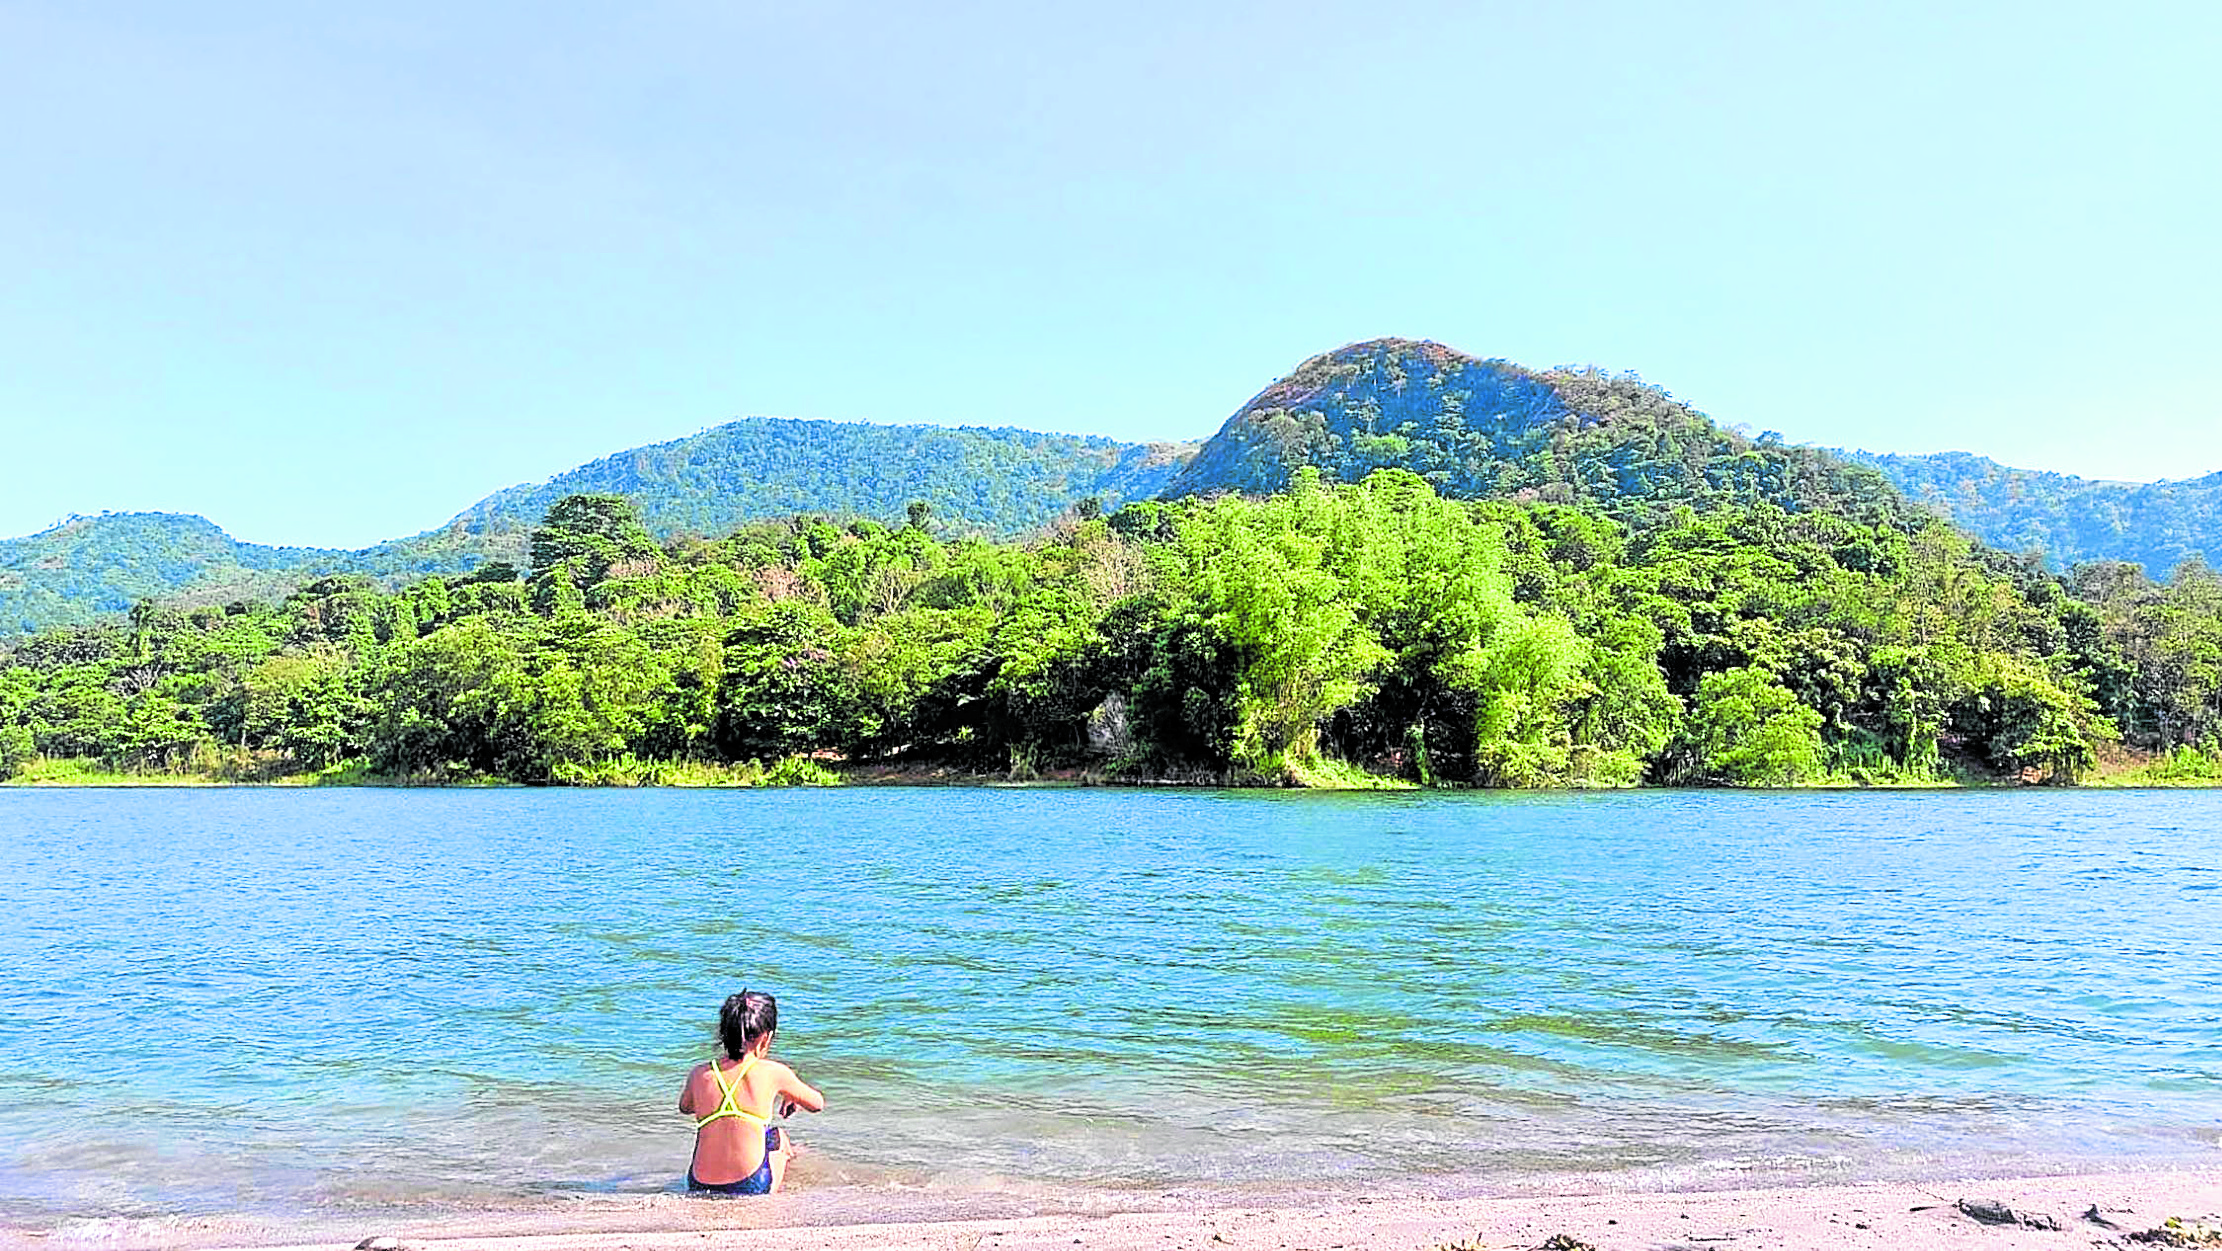 The pristine surroundings and a refreshingdip in Mapanuepe Lake have been attracting visitors to this spot in Zambales.